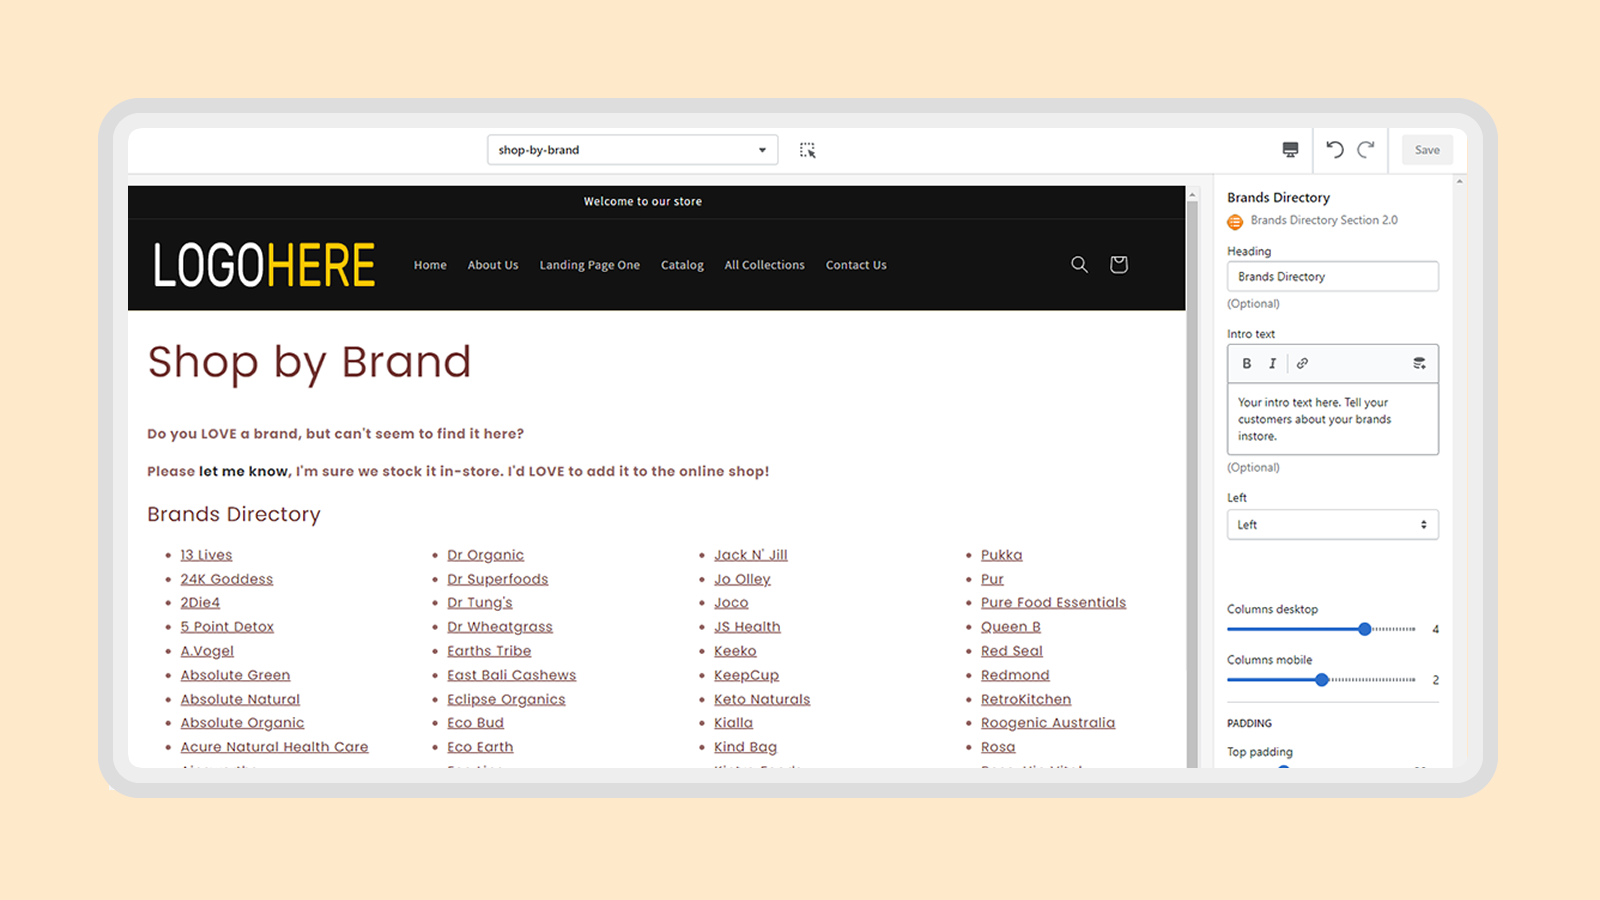 Brands Directory in the customizer settings 2